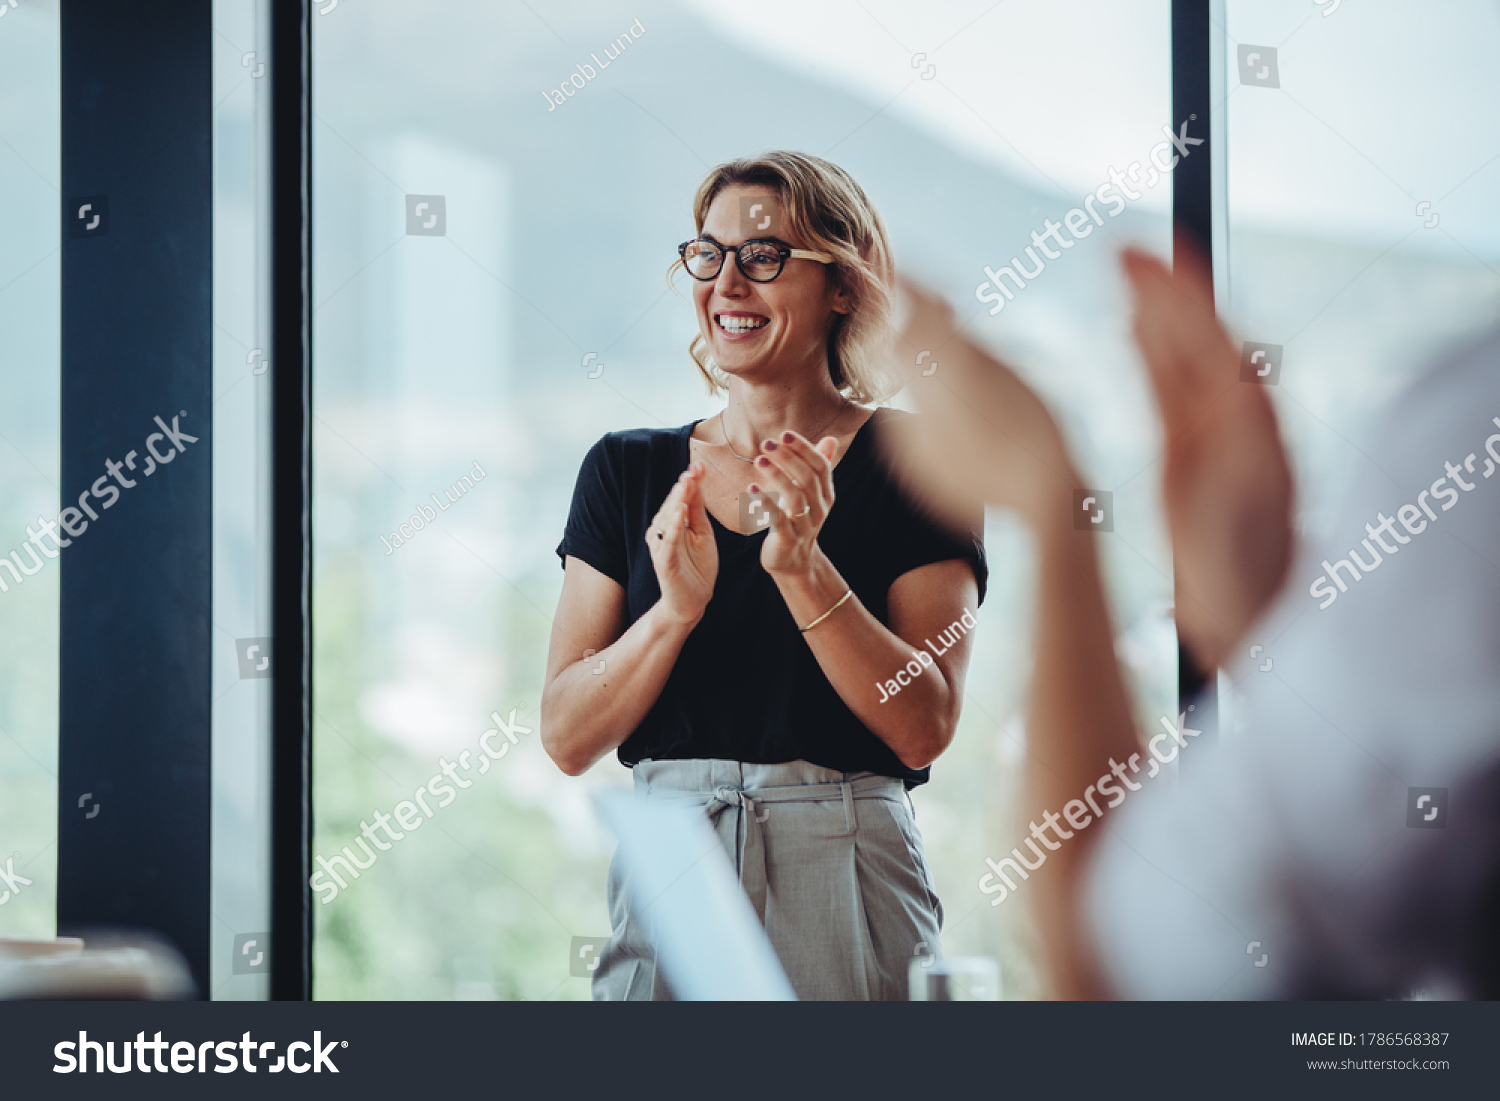 Businesswoman clapping hands after successful brainstorming session in boardroom. Business people women applauding after productive meeting. #1786568387